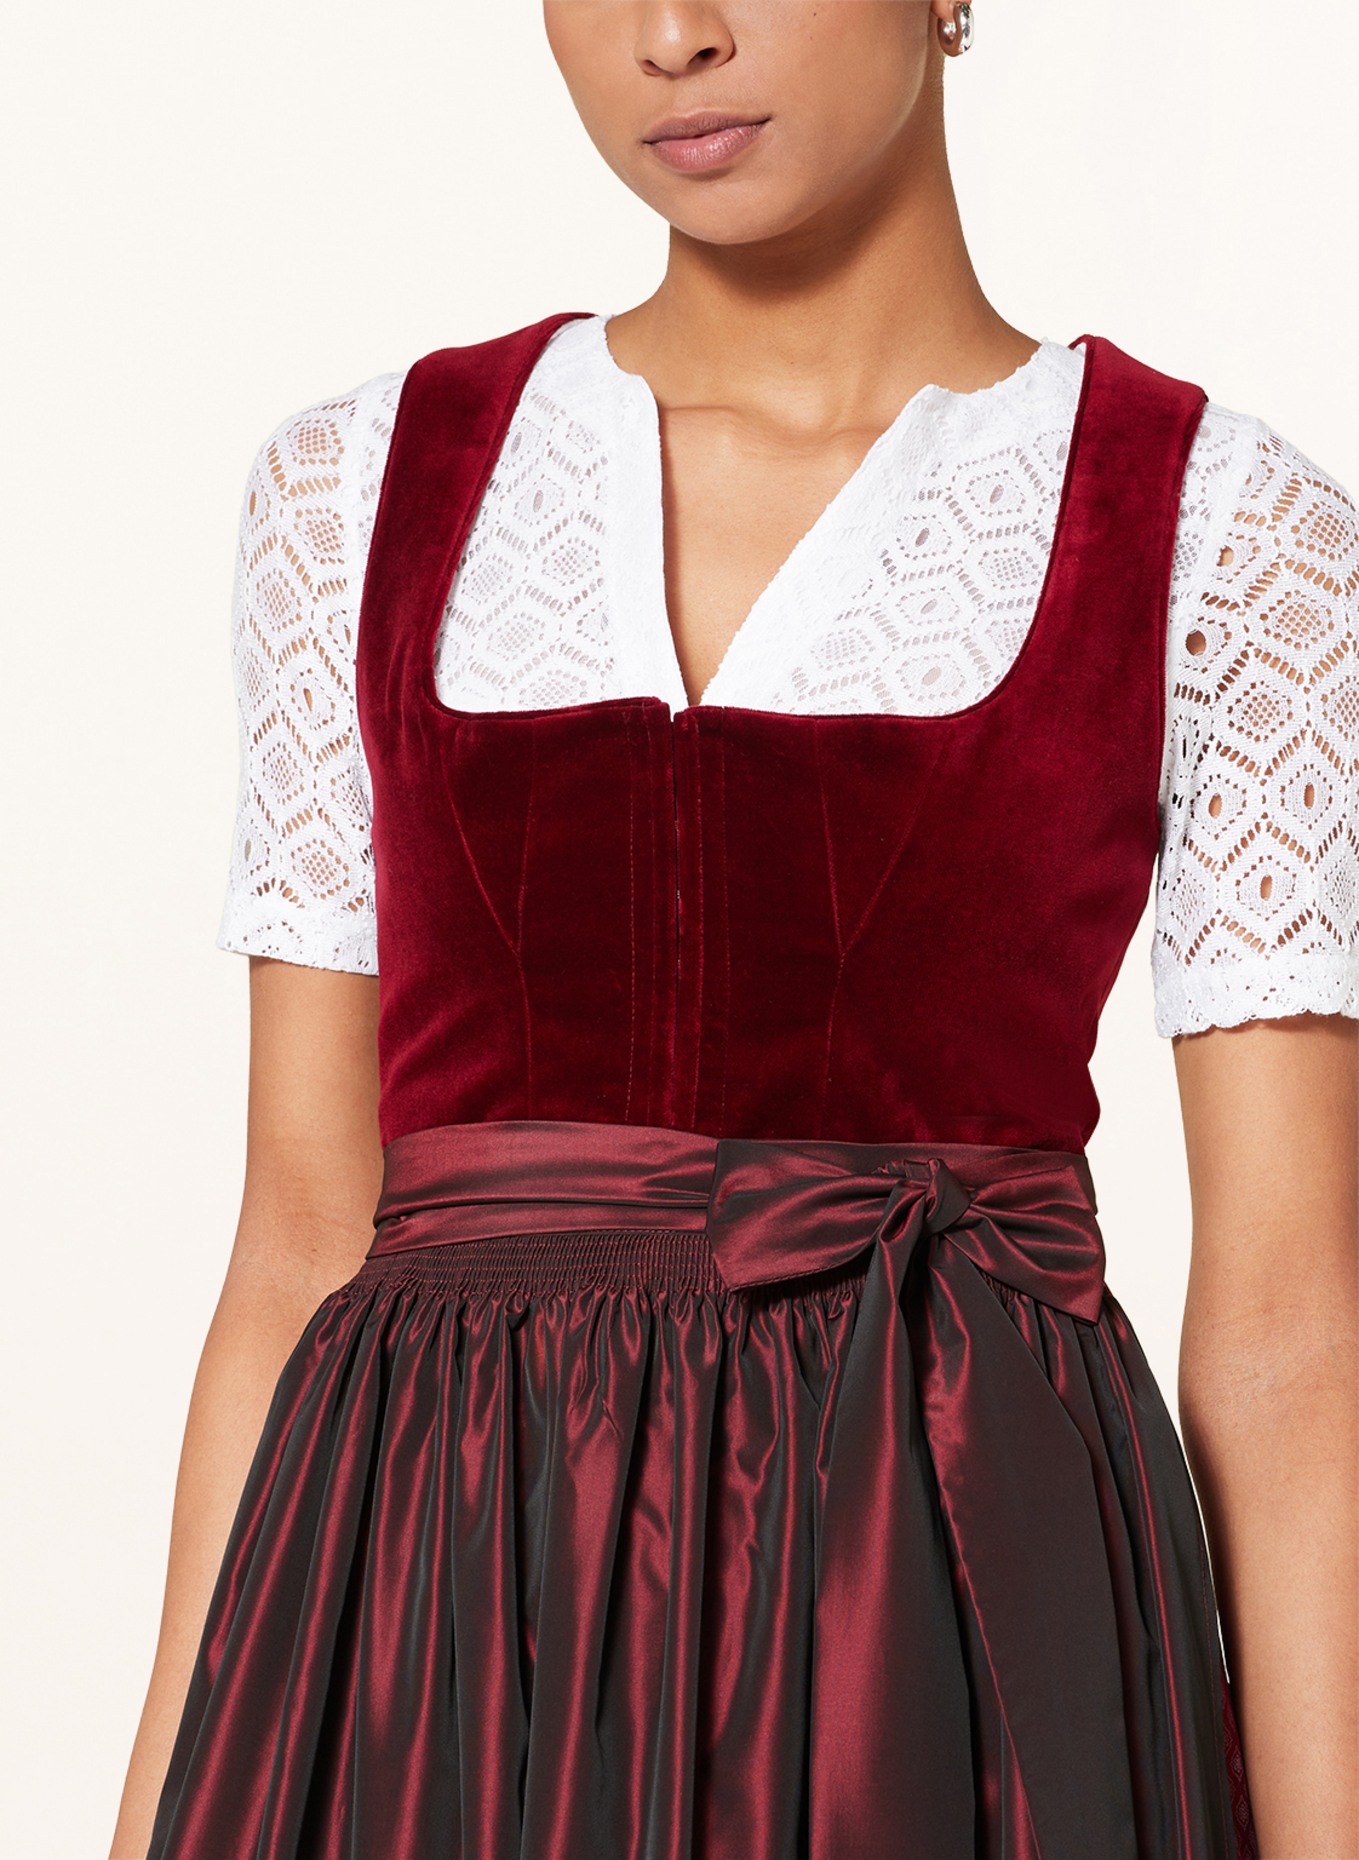 WALDORFF Dirndl blouse made of lace, Color: WHITE (Image 3)